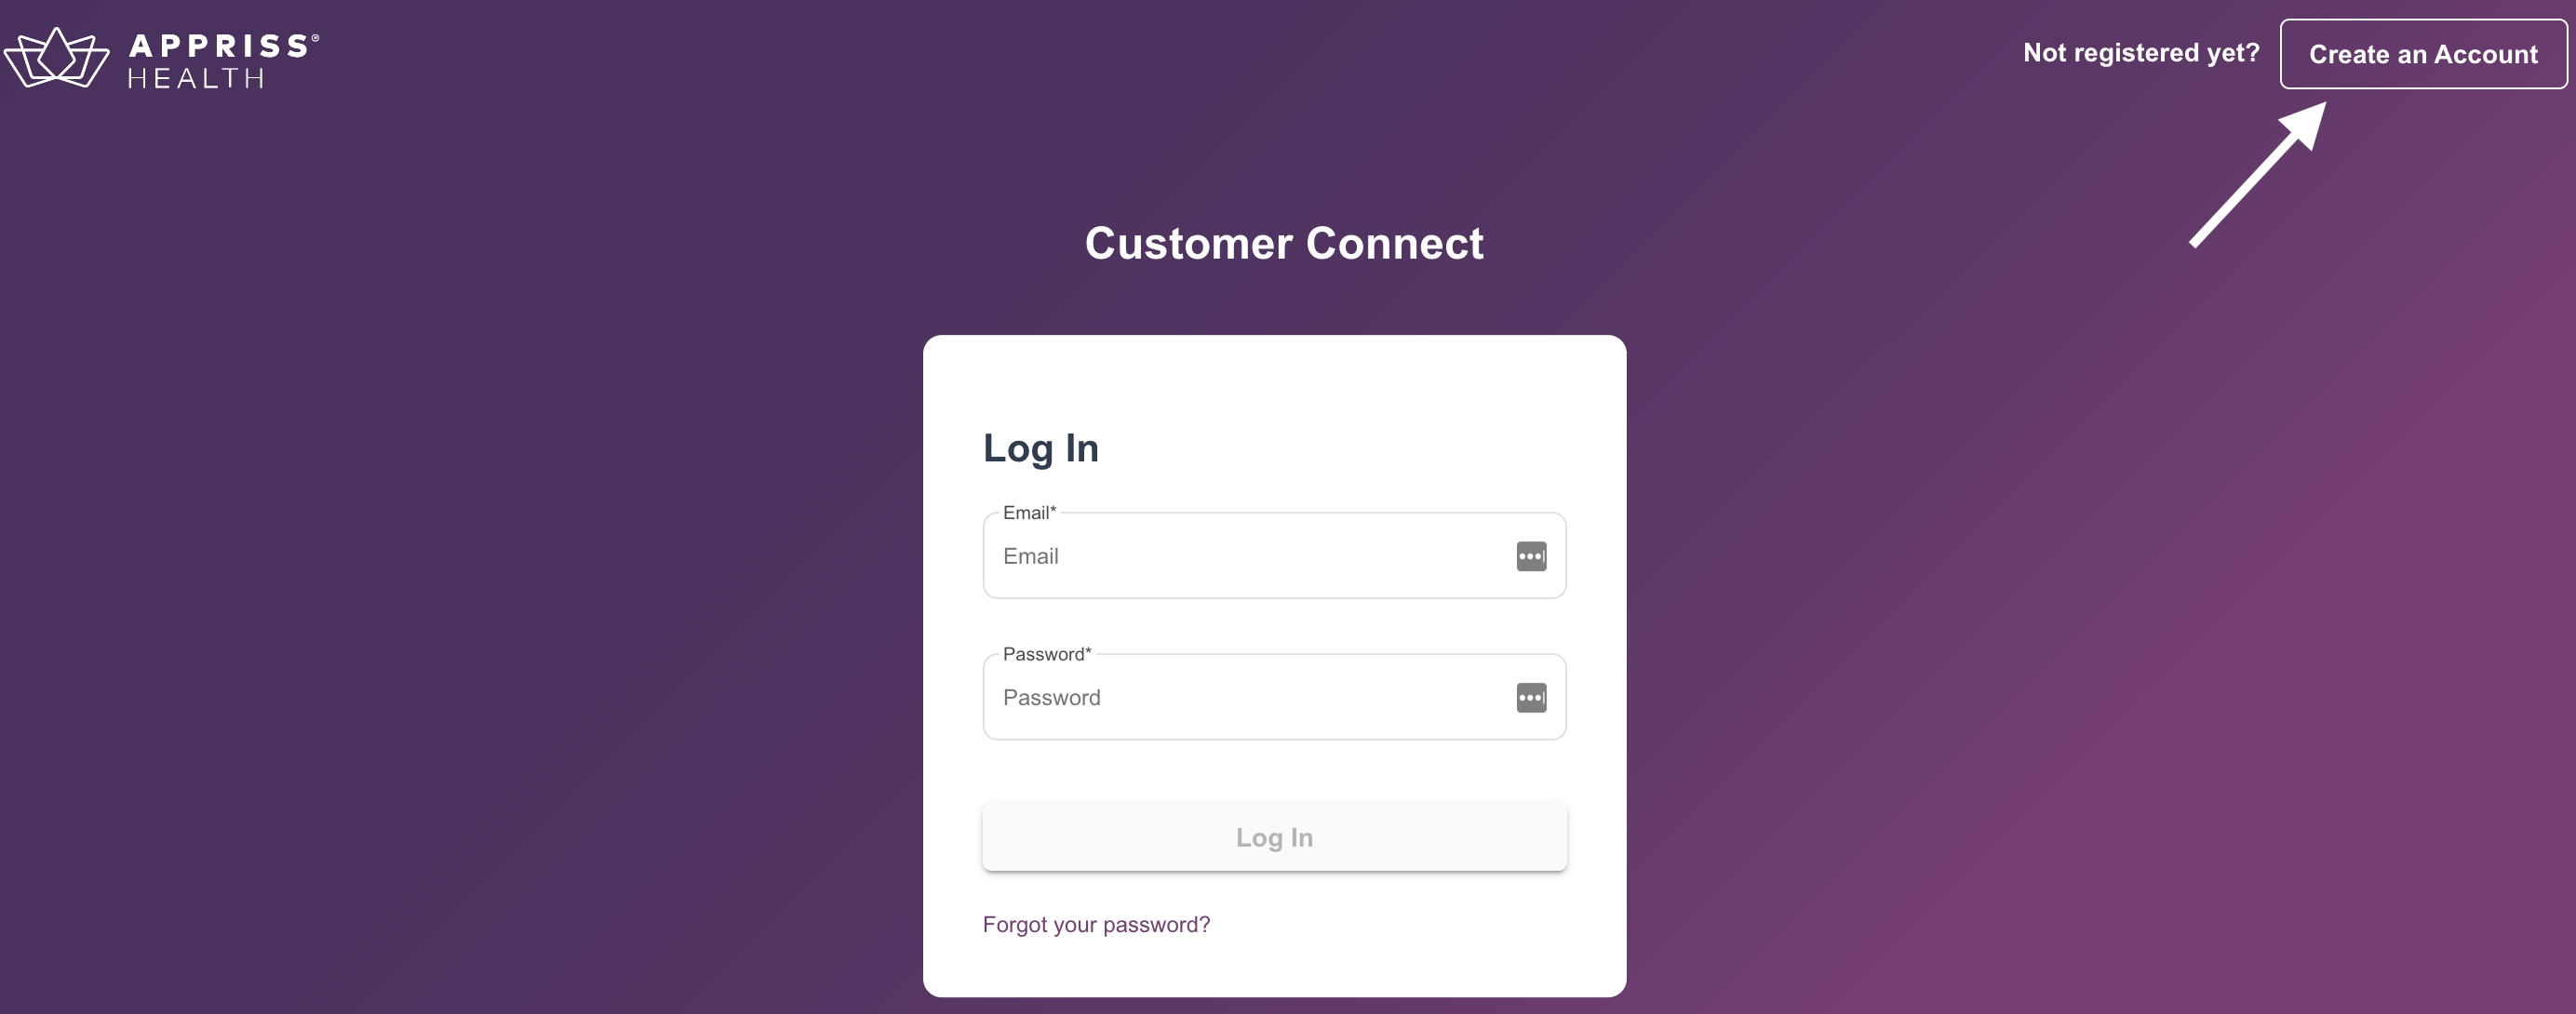 Appriss_Health_Customer_Connect_Page_.png